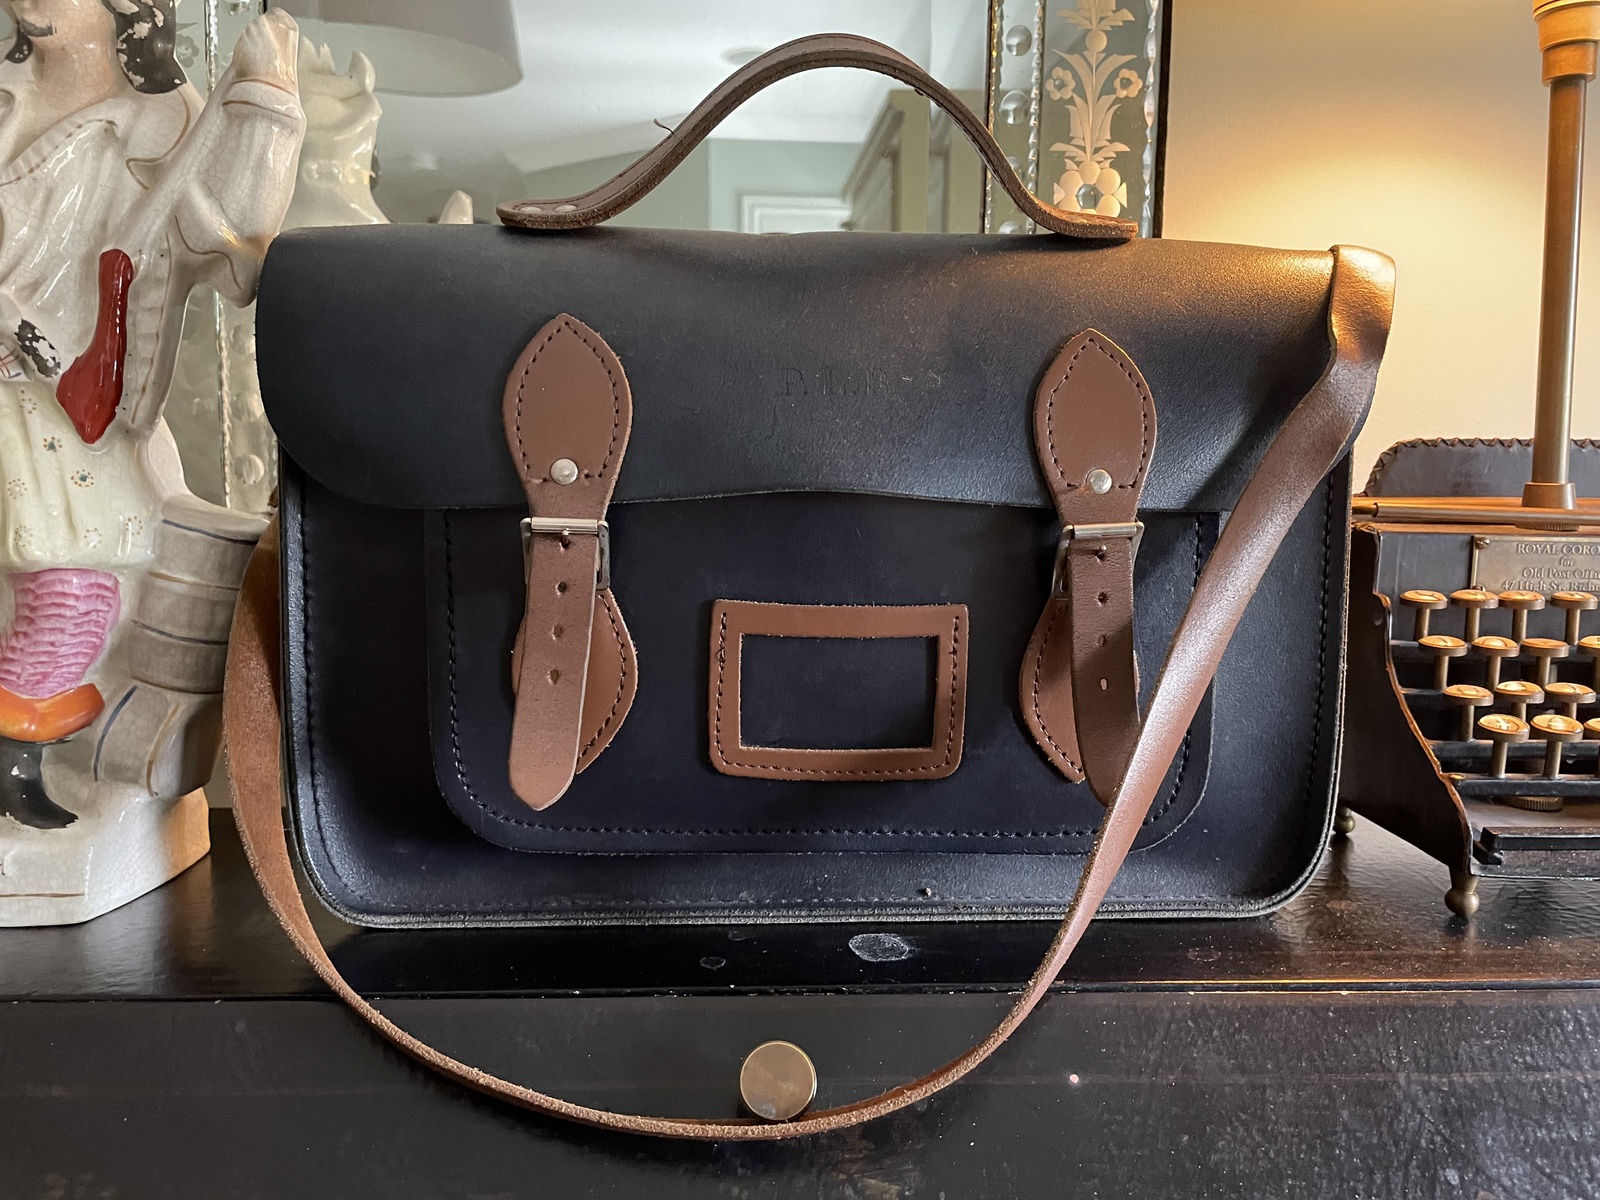 A leather satchel